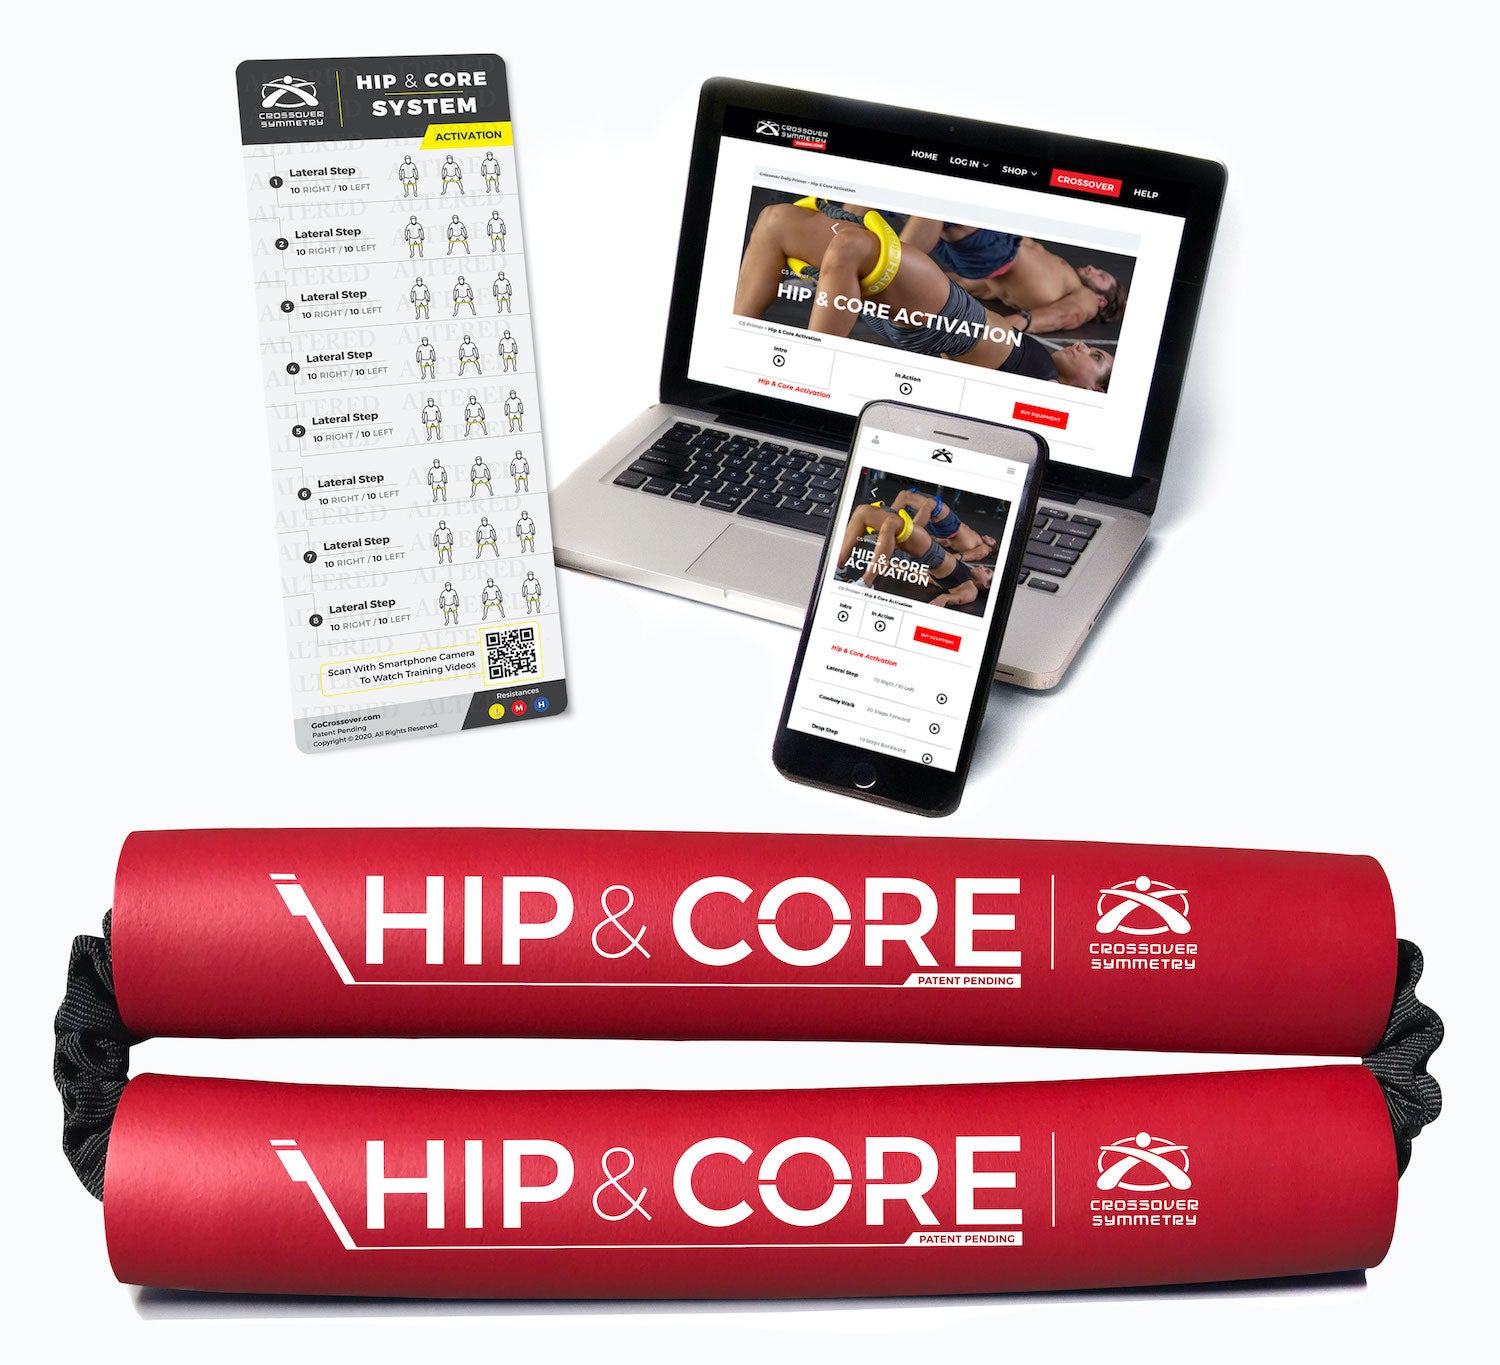 crossover symmetry hip and core system